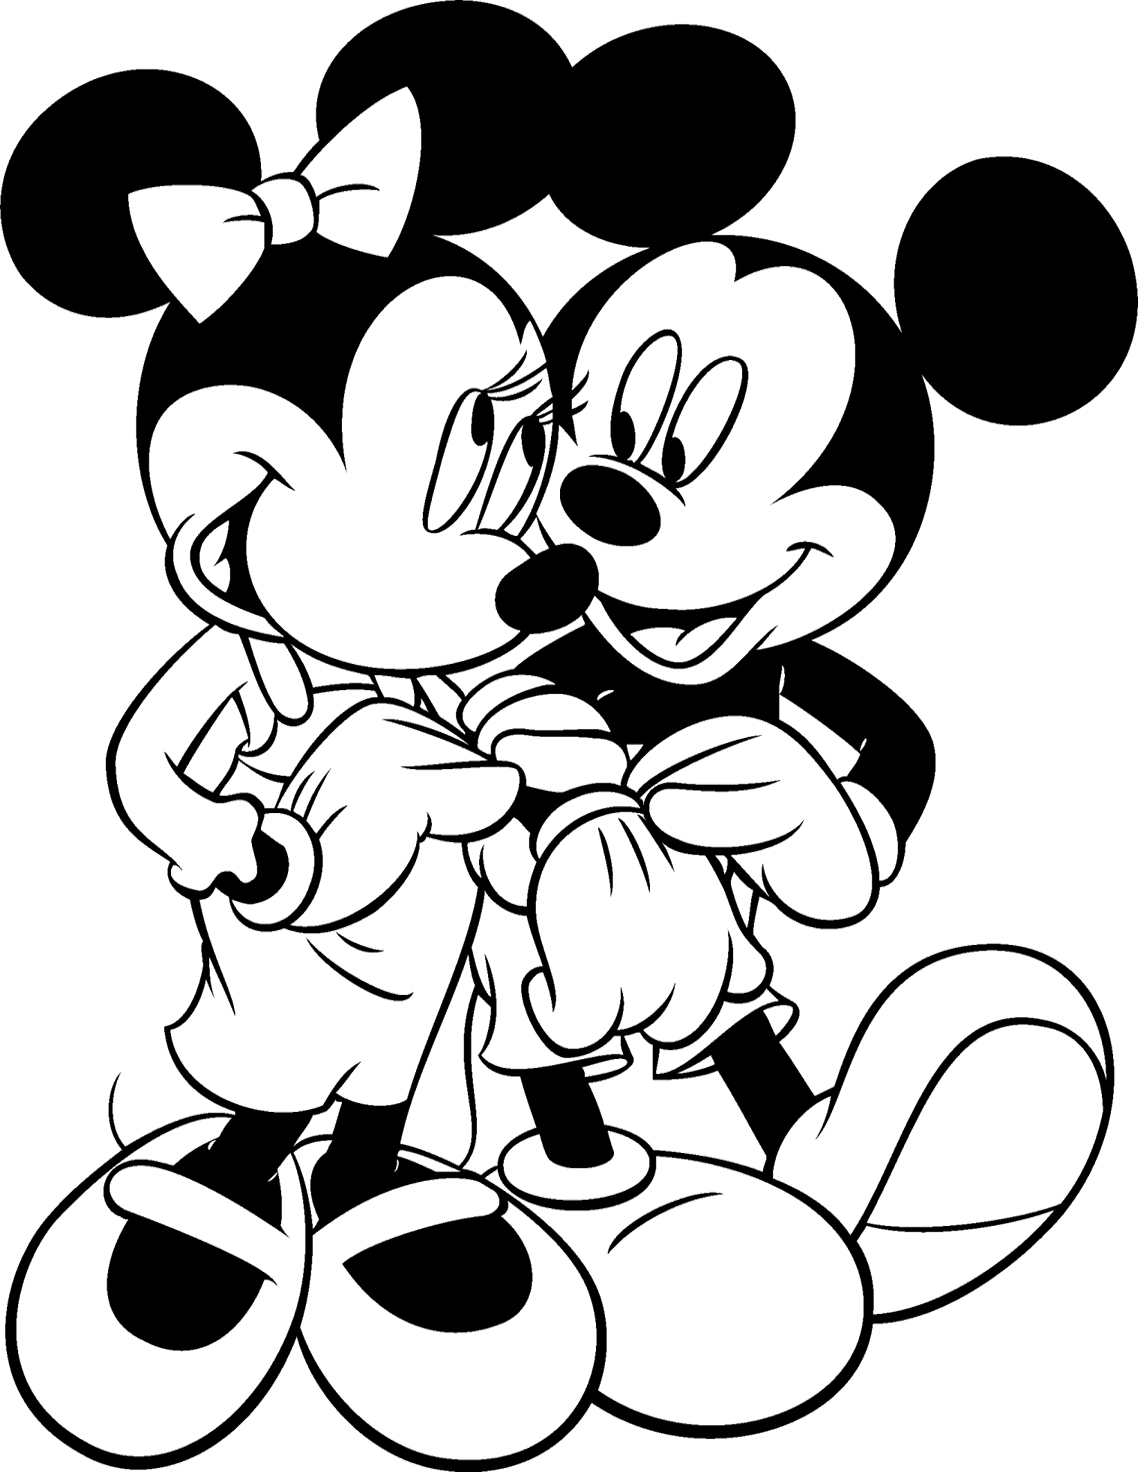 free-minnie-mouse-black-face-download-free-minnie-mouse-black-face-png-images-free-cliparts-on